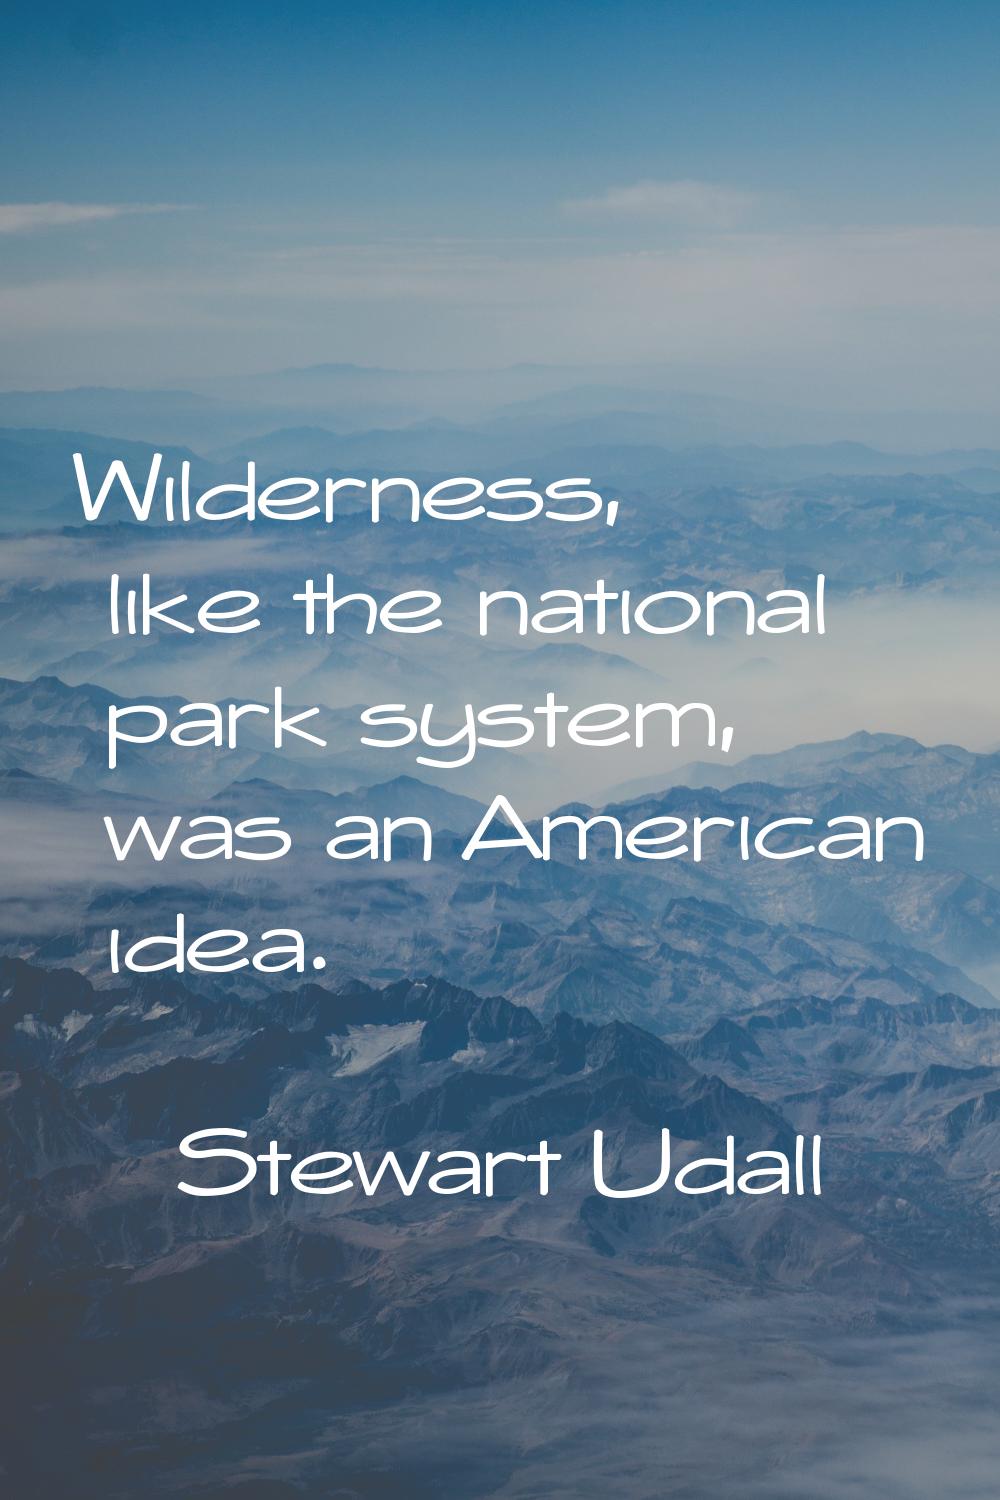 Wilderness, like the national park system, was an American idea.